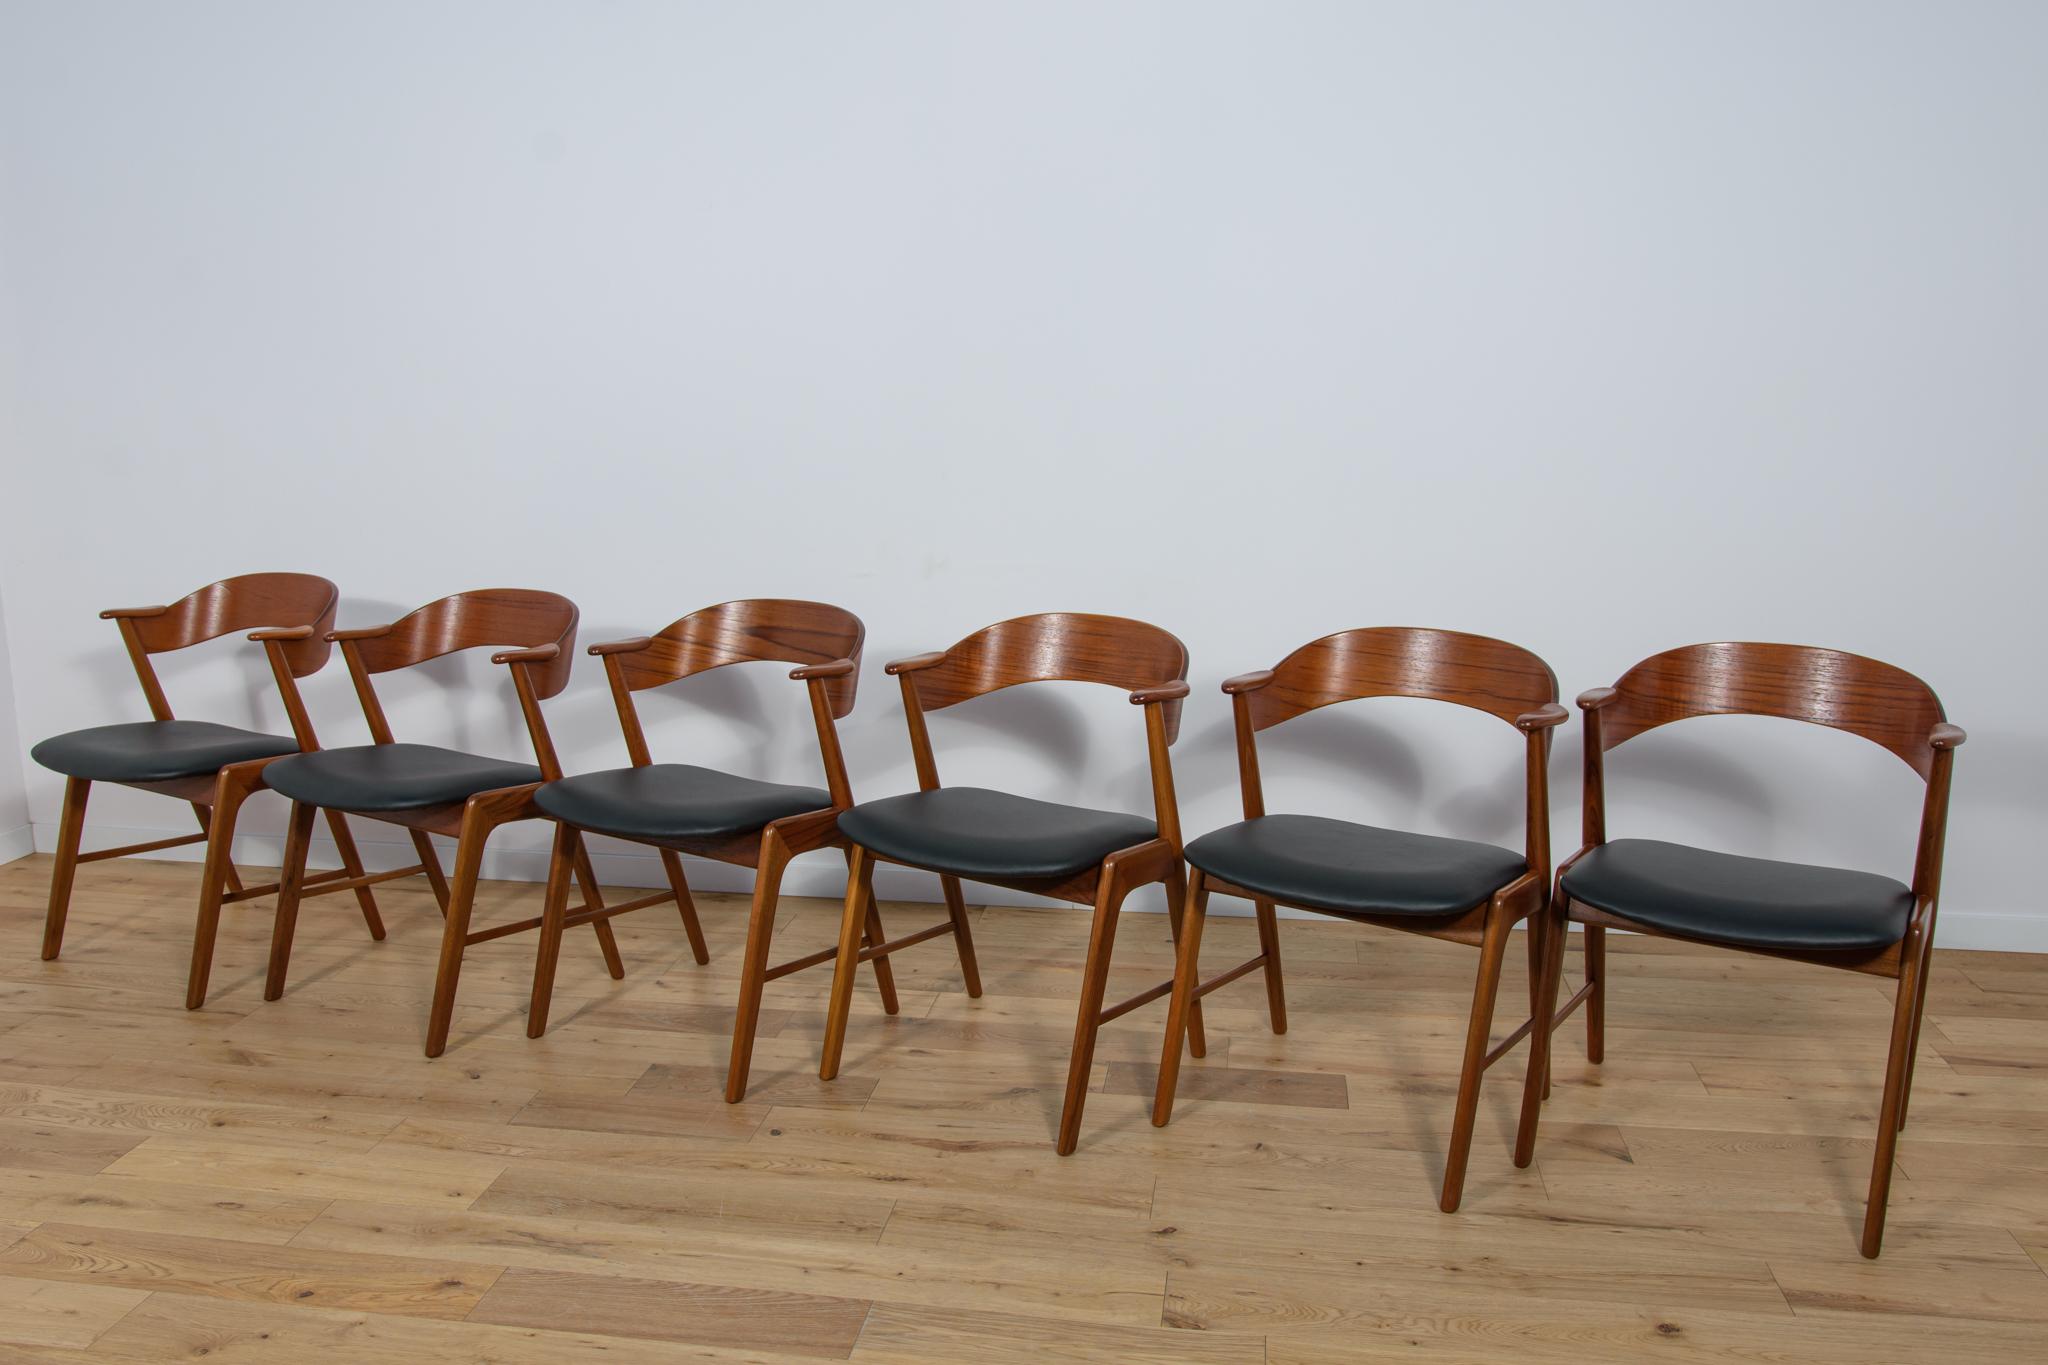 Set of six dining chairs produced by Korup Stolefabrik in the Denmark circa 1960. Elegant chairs with an interesting form. The teak has been cleaned from the old surface and finished with Danish Oil. Upholstery interiors replaced. Upholstered with